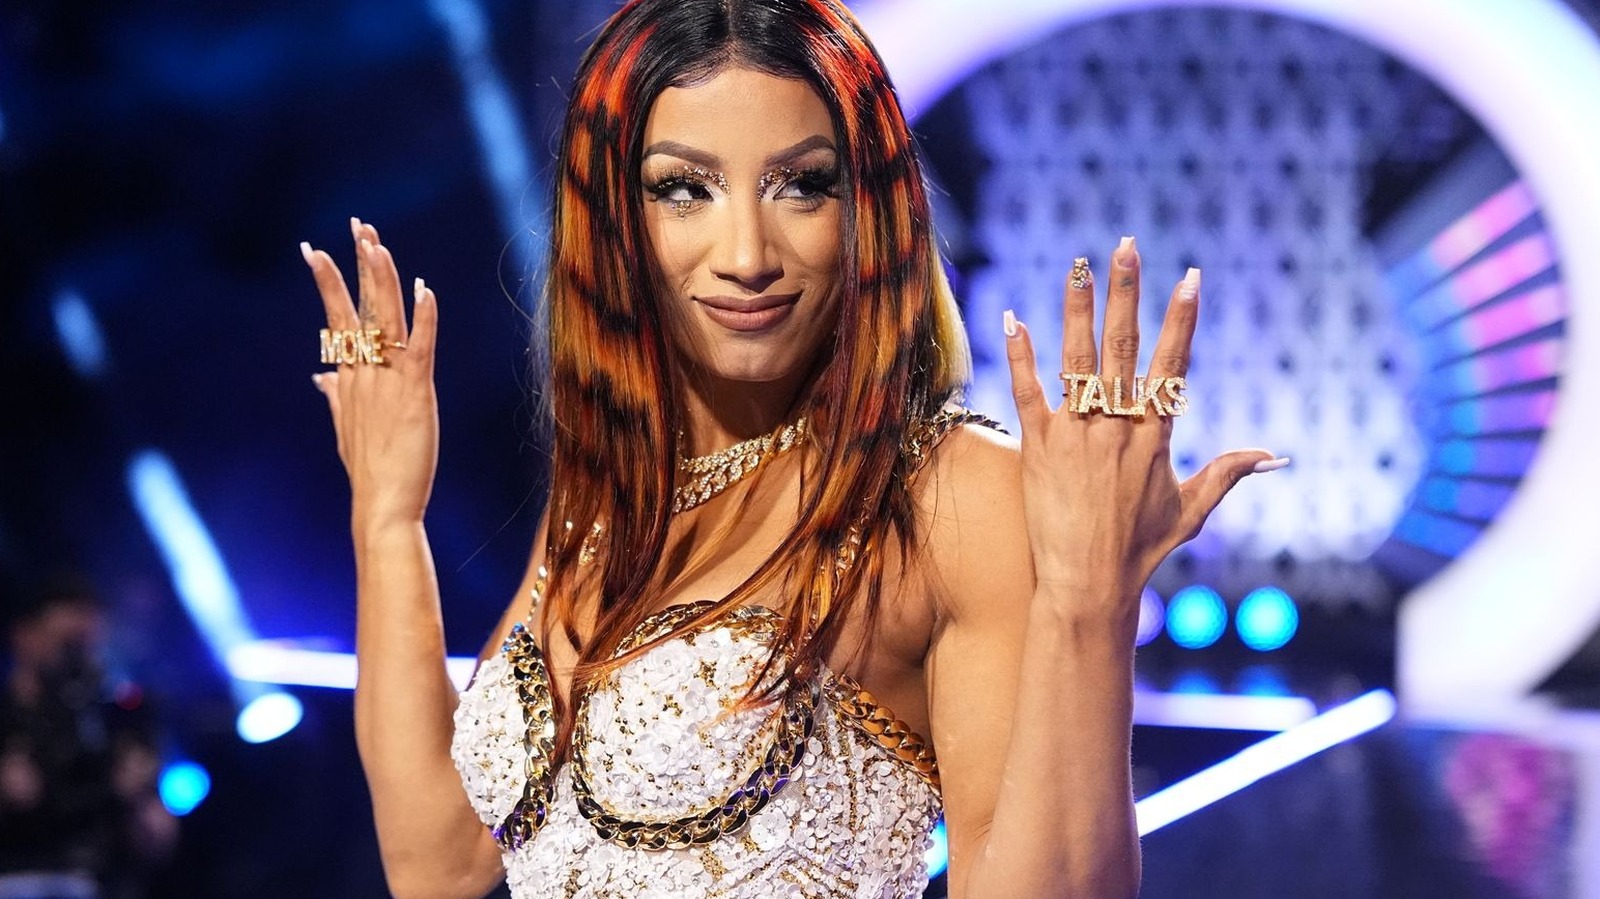 Backstage Report Offers Details On Mercedes Mone's Negotiations With AEW, WWE